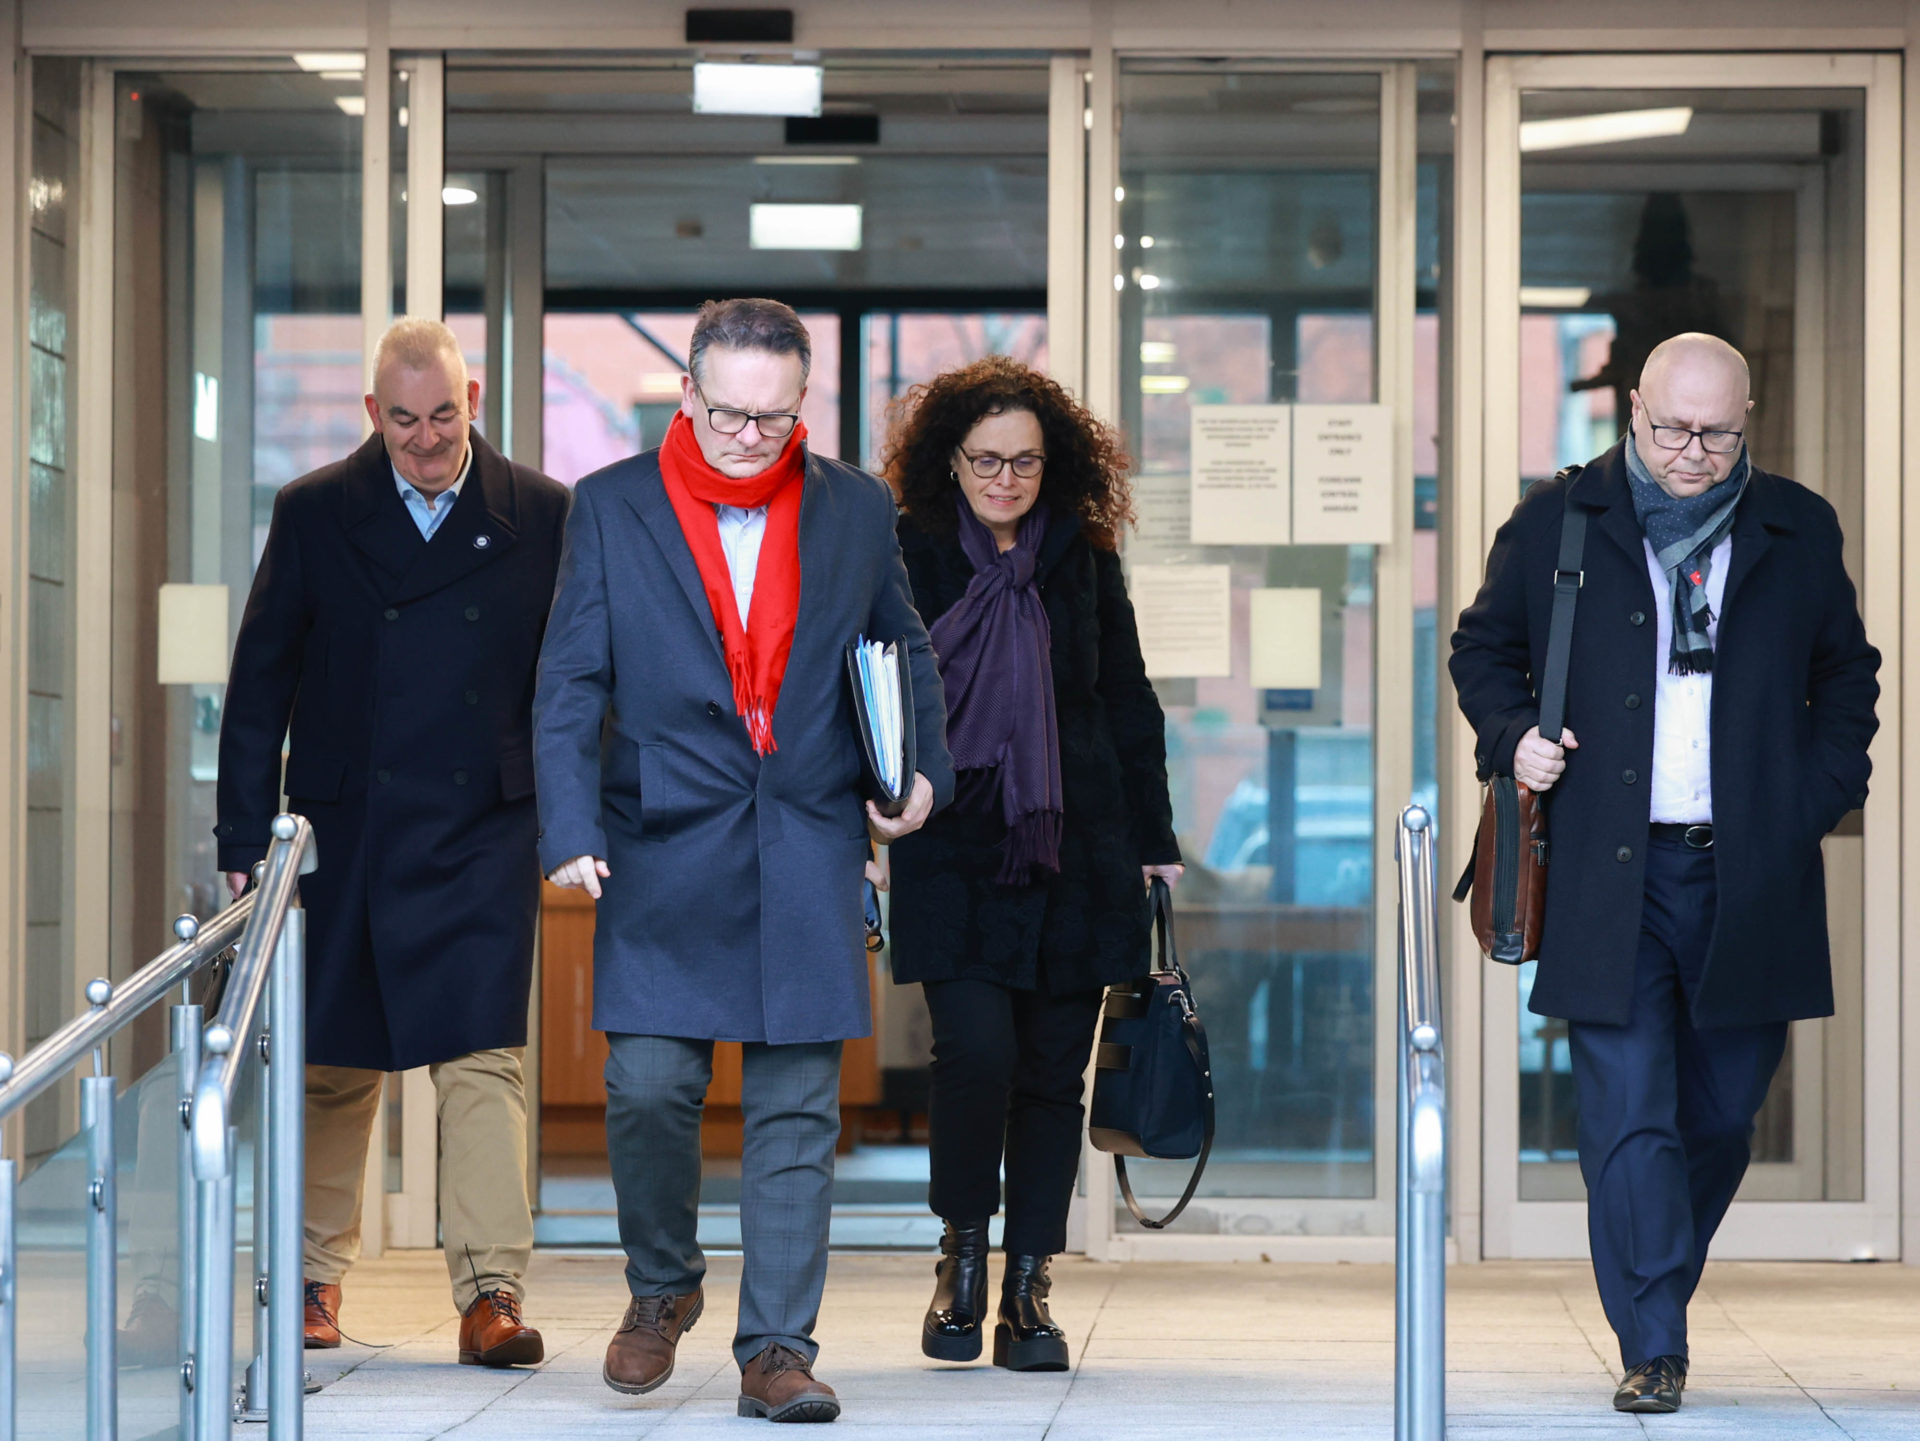 Union leaders leave the Workplace Relations Commission in Dublin